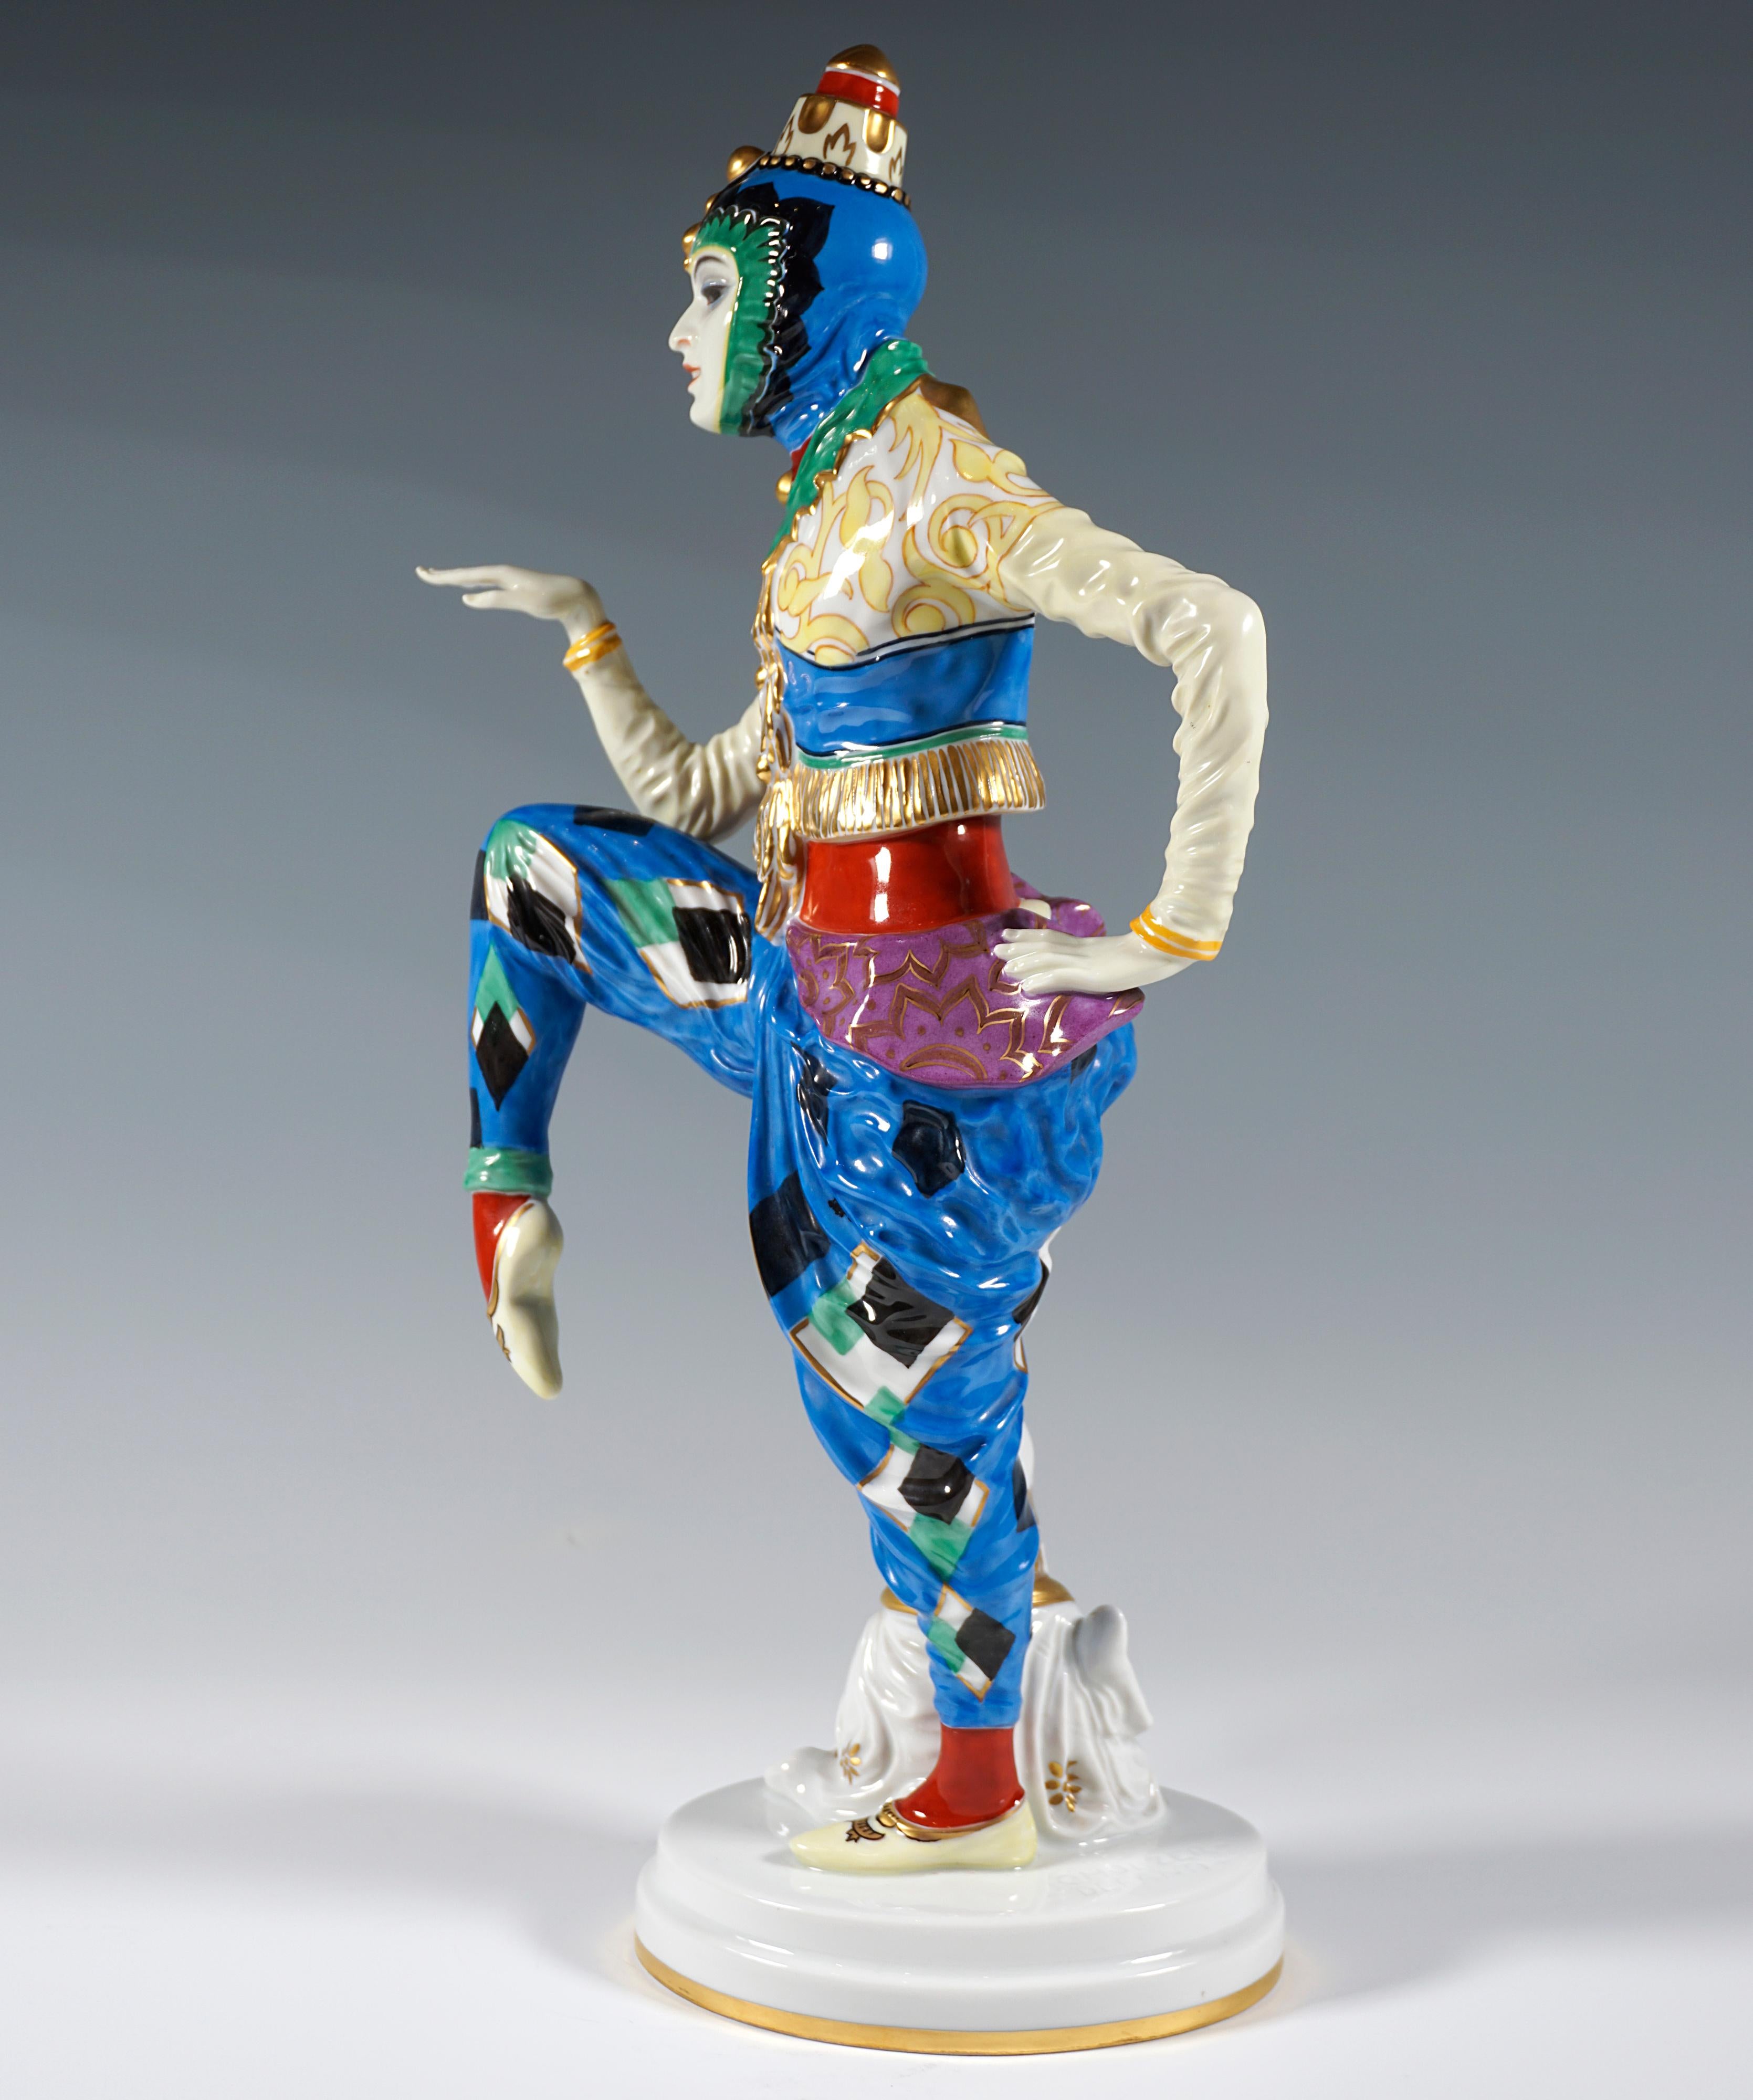 Dancer in an oriental costume with traditional Korean looking headdress, with raised, bent legs and arms performing a dance pose, a Chinese pagoda leaning against her leg. The figure is richly painted in bright colors and gold and is based on a